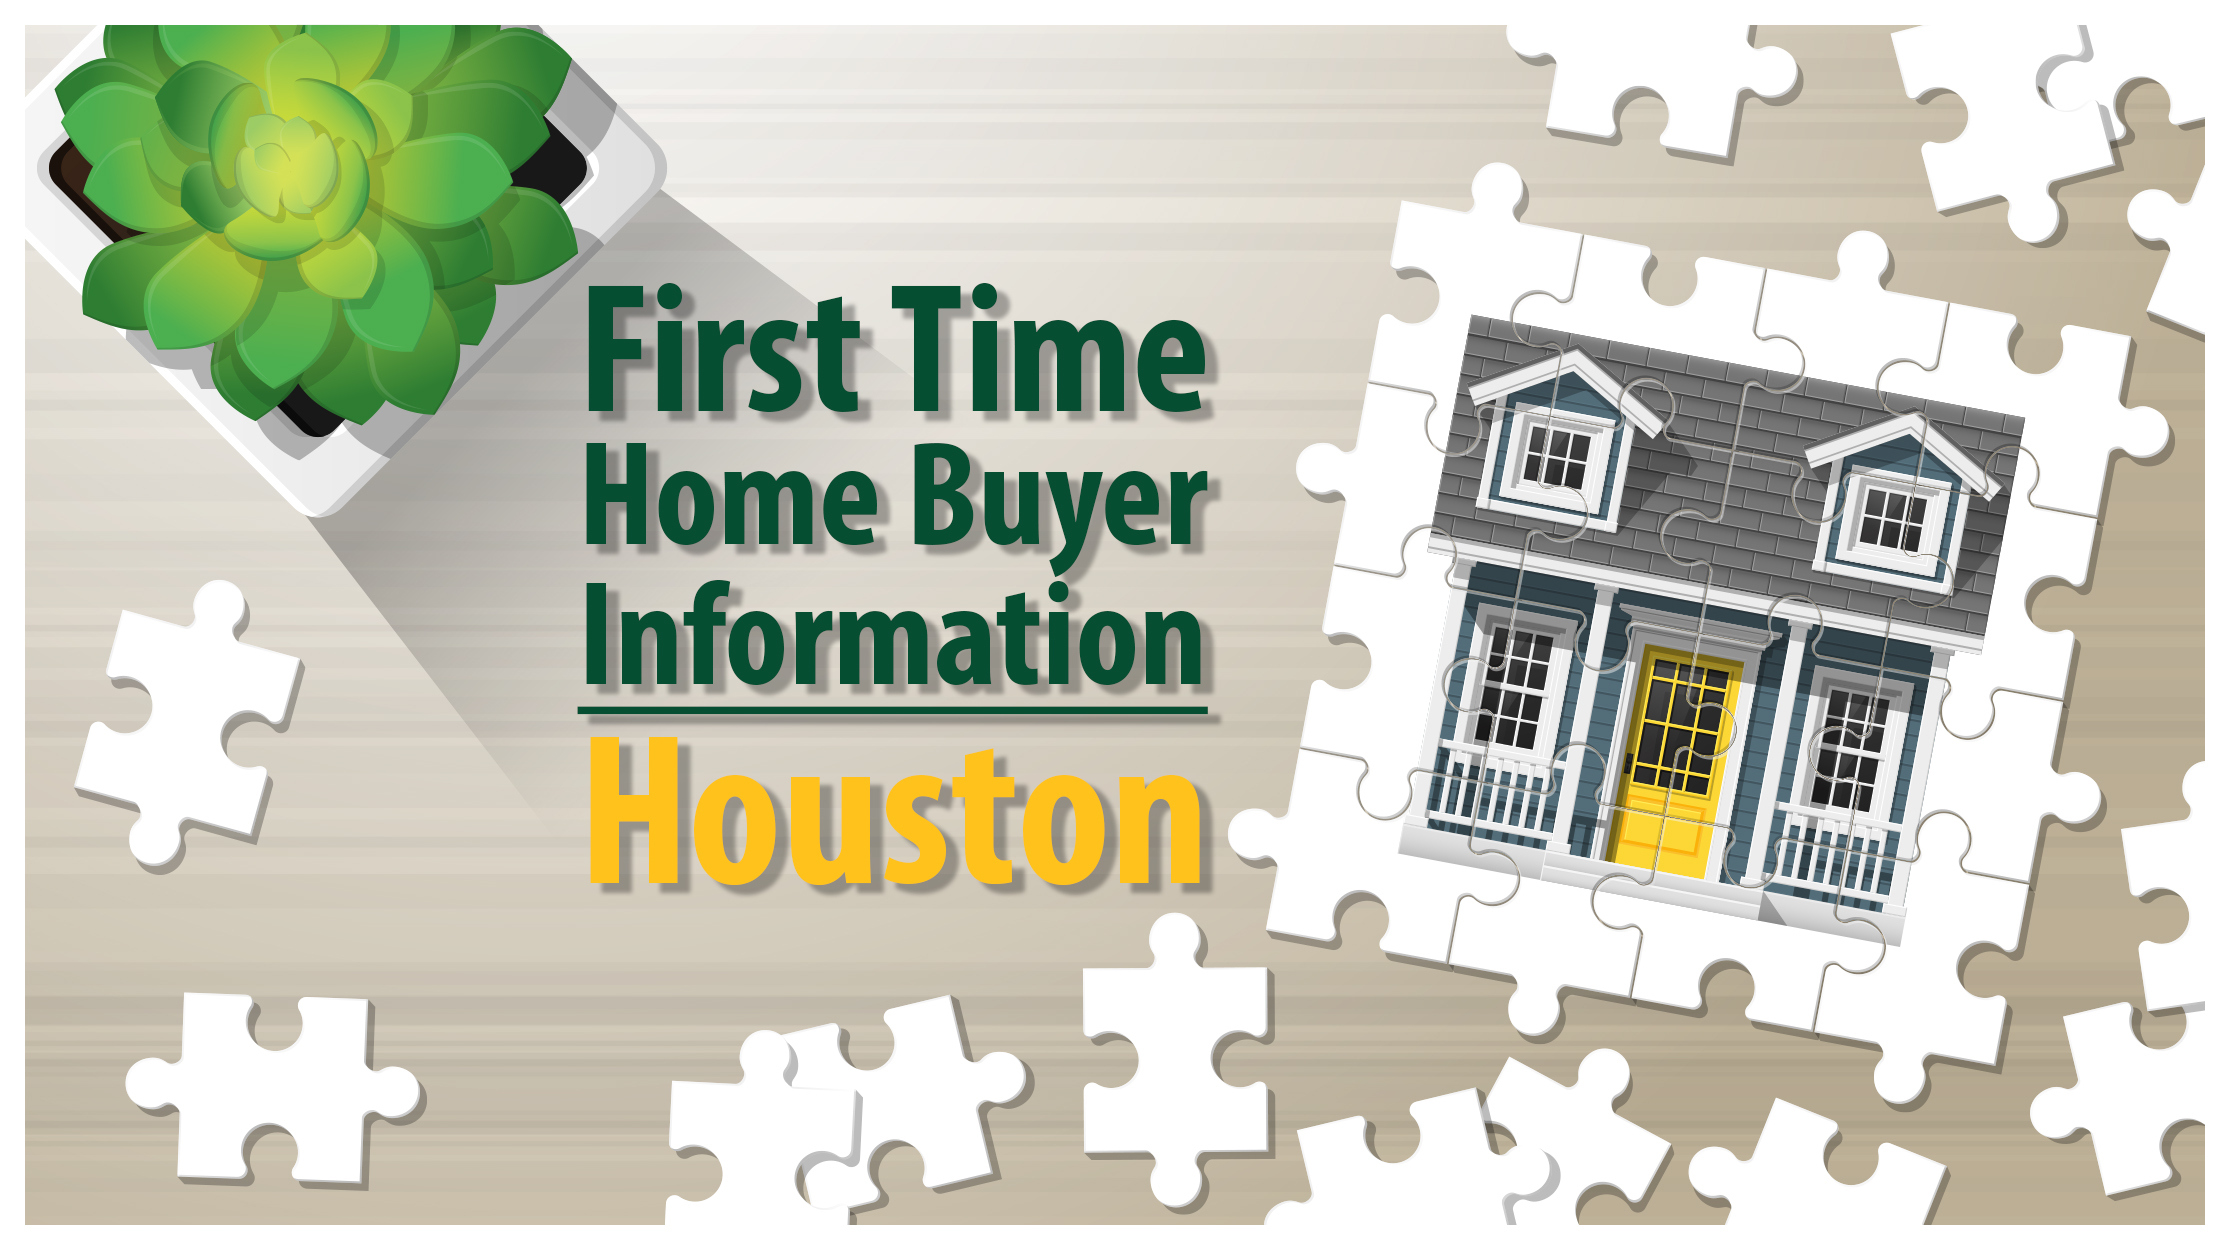 Houston first time home buyer